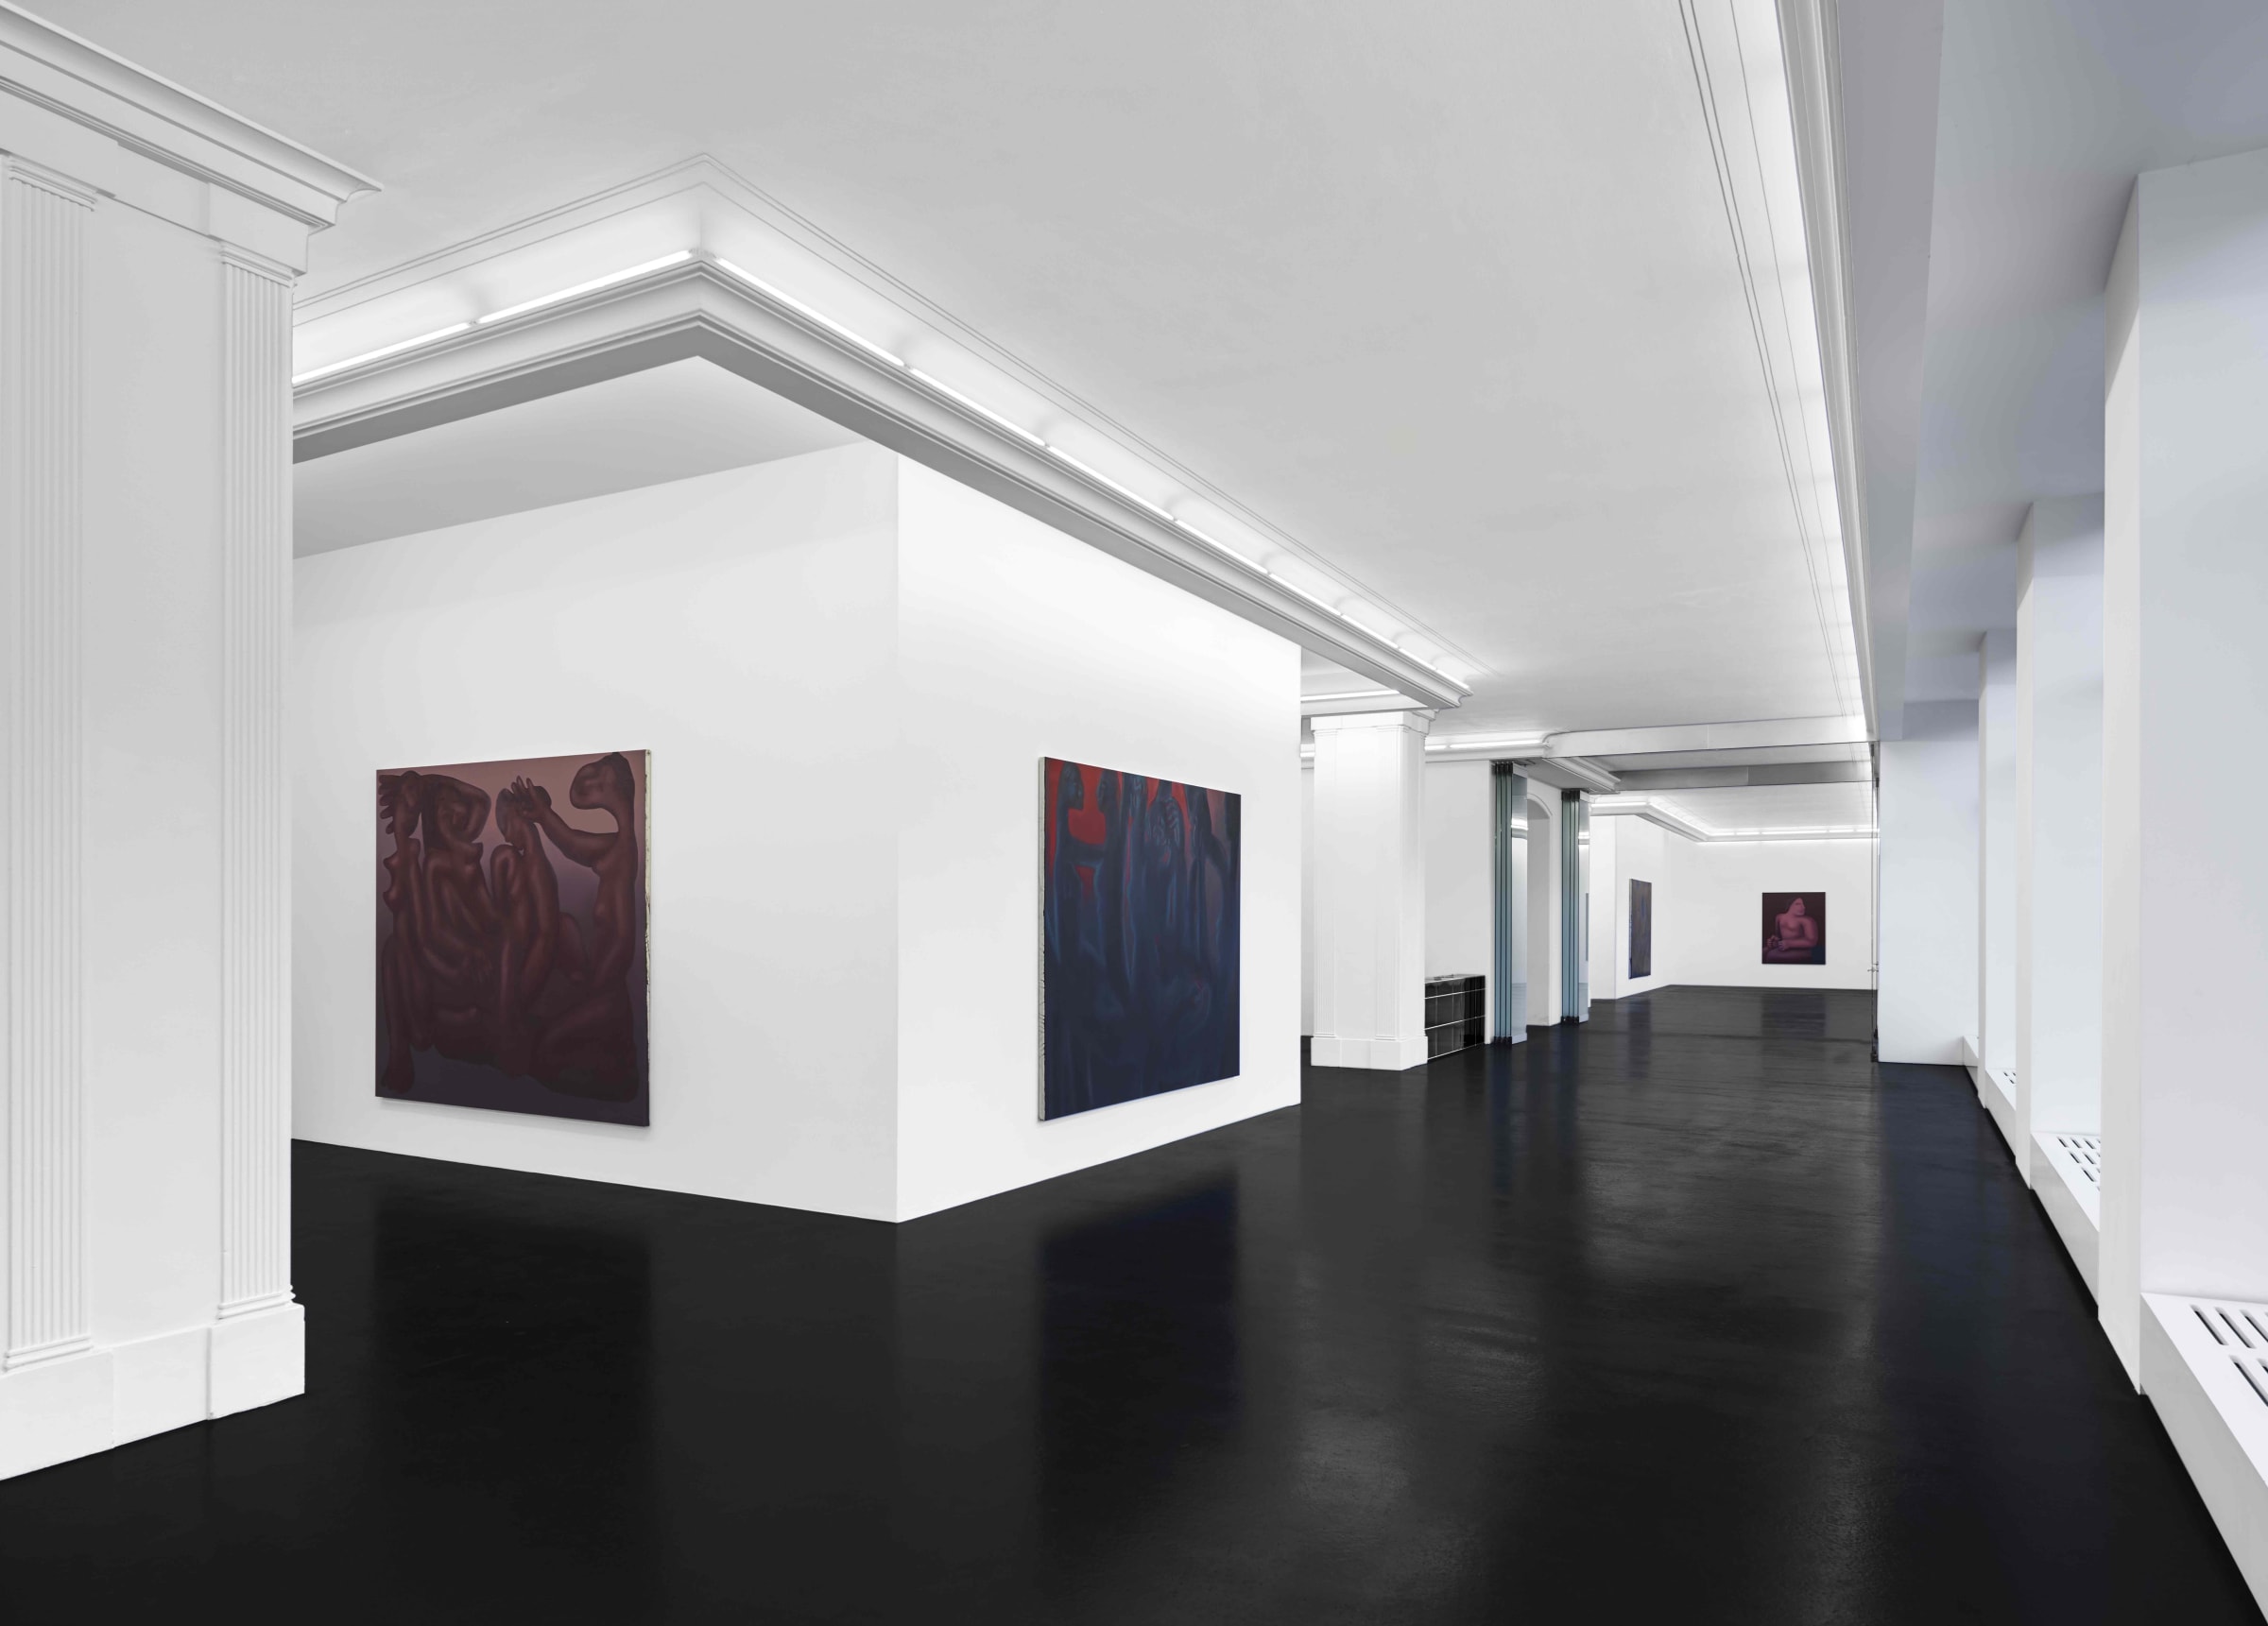 George Rouy Maelstrom Installation View January 17 – February 14, 2020 Peres Projects, Berlin Photographed by: Matthias Kolb